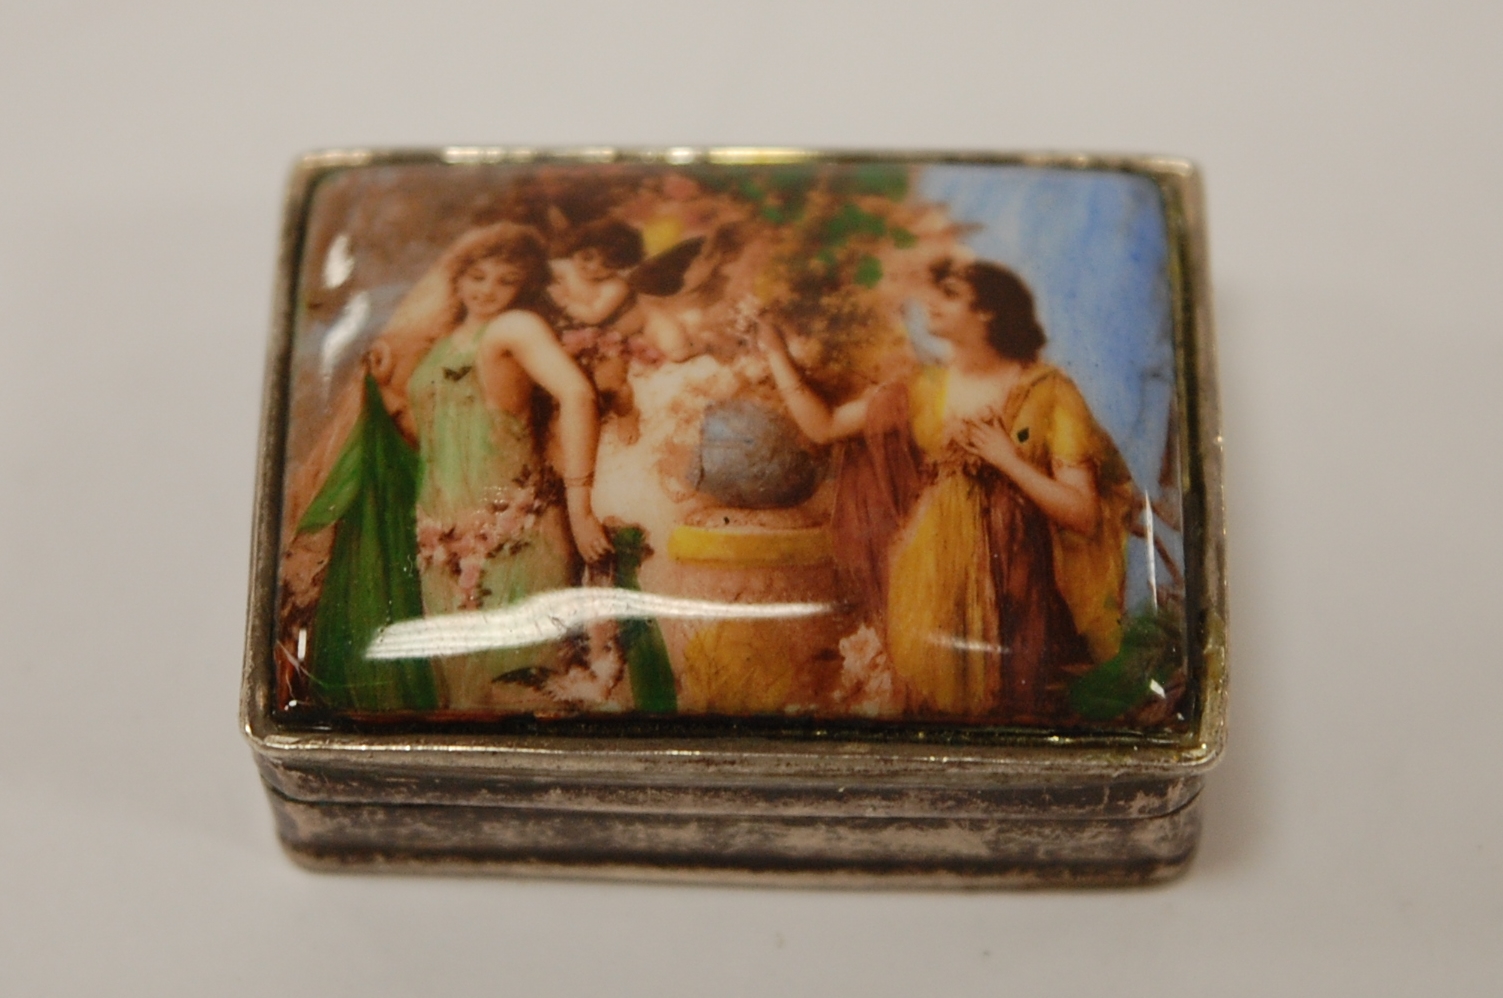 A reproduction silver and porcelain topped pillbox